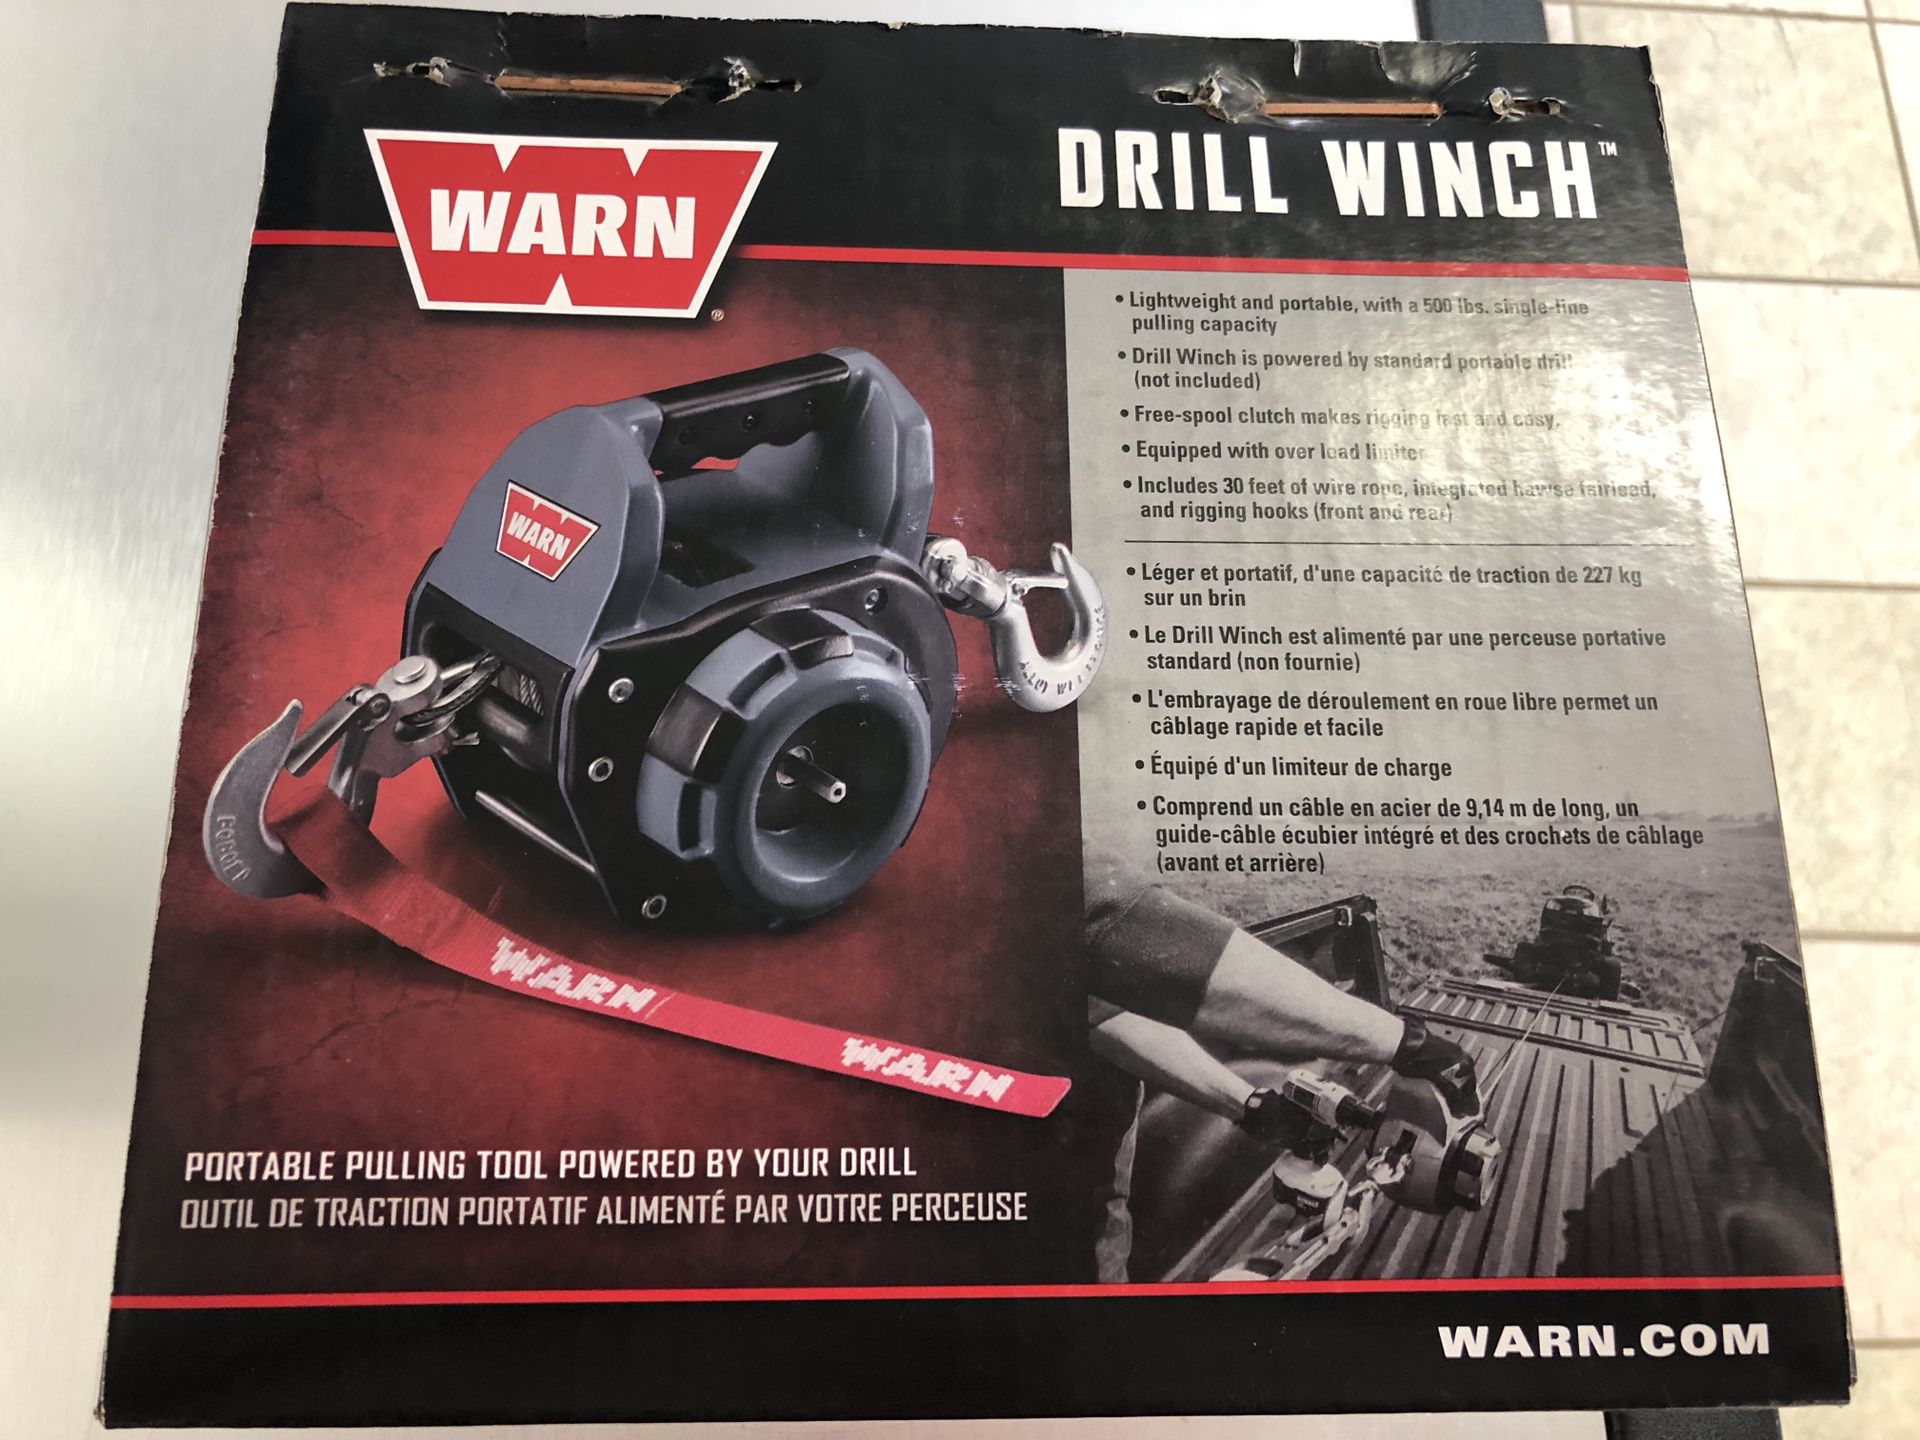 Warn Drill Winch - Brand New. 500 lb. single-line pulling capacity. 30 ft wire rope.